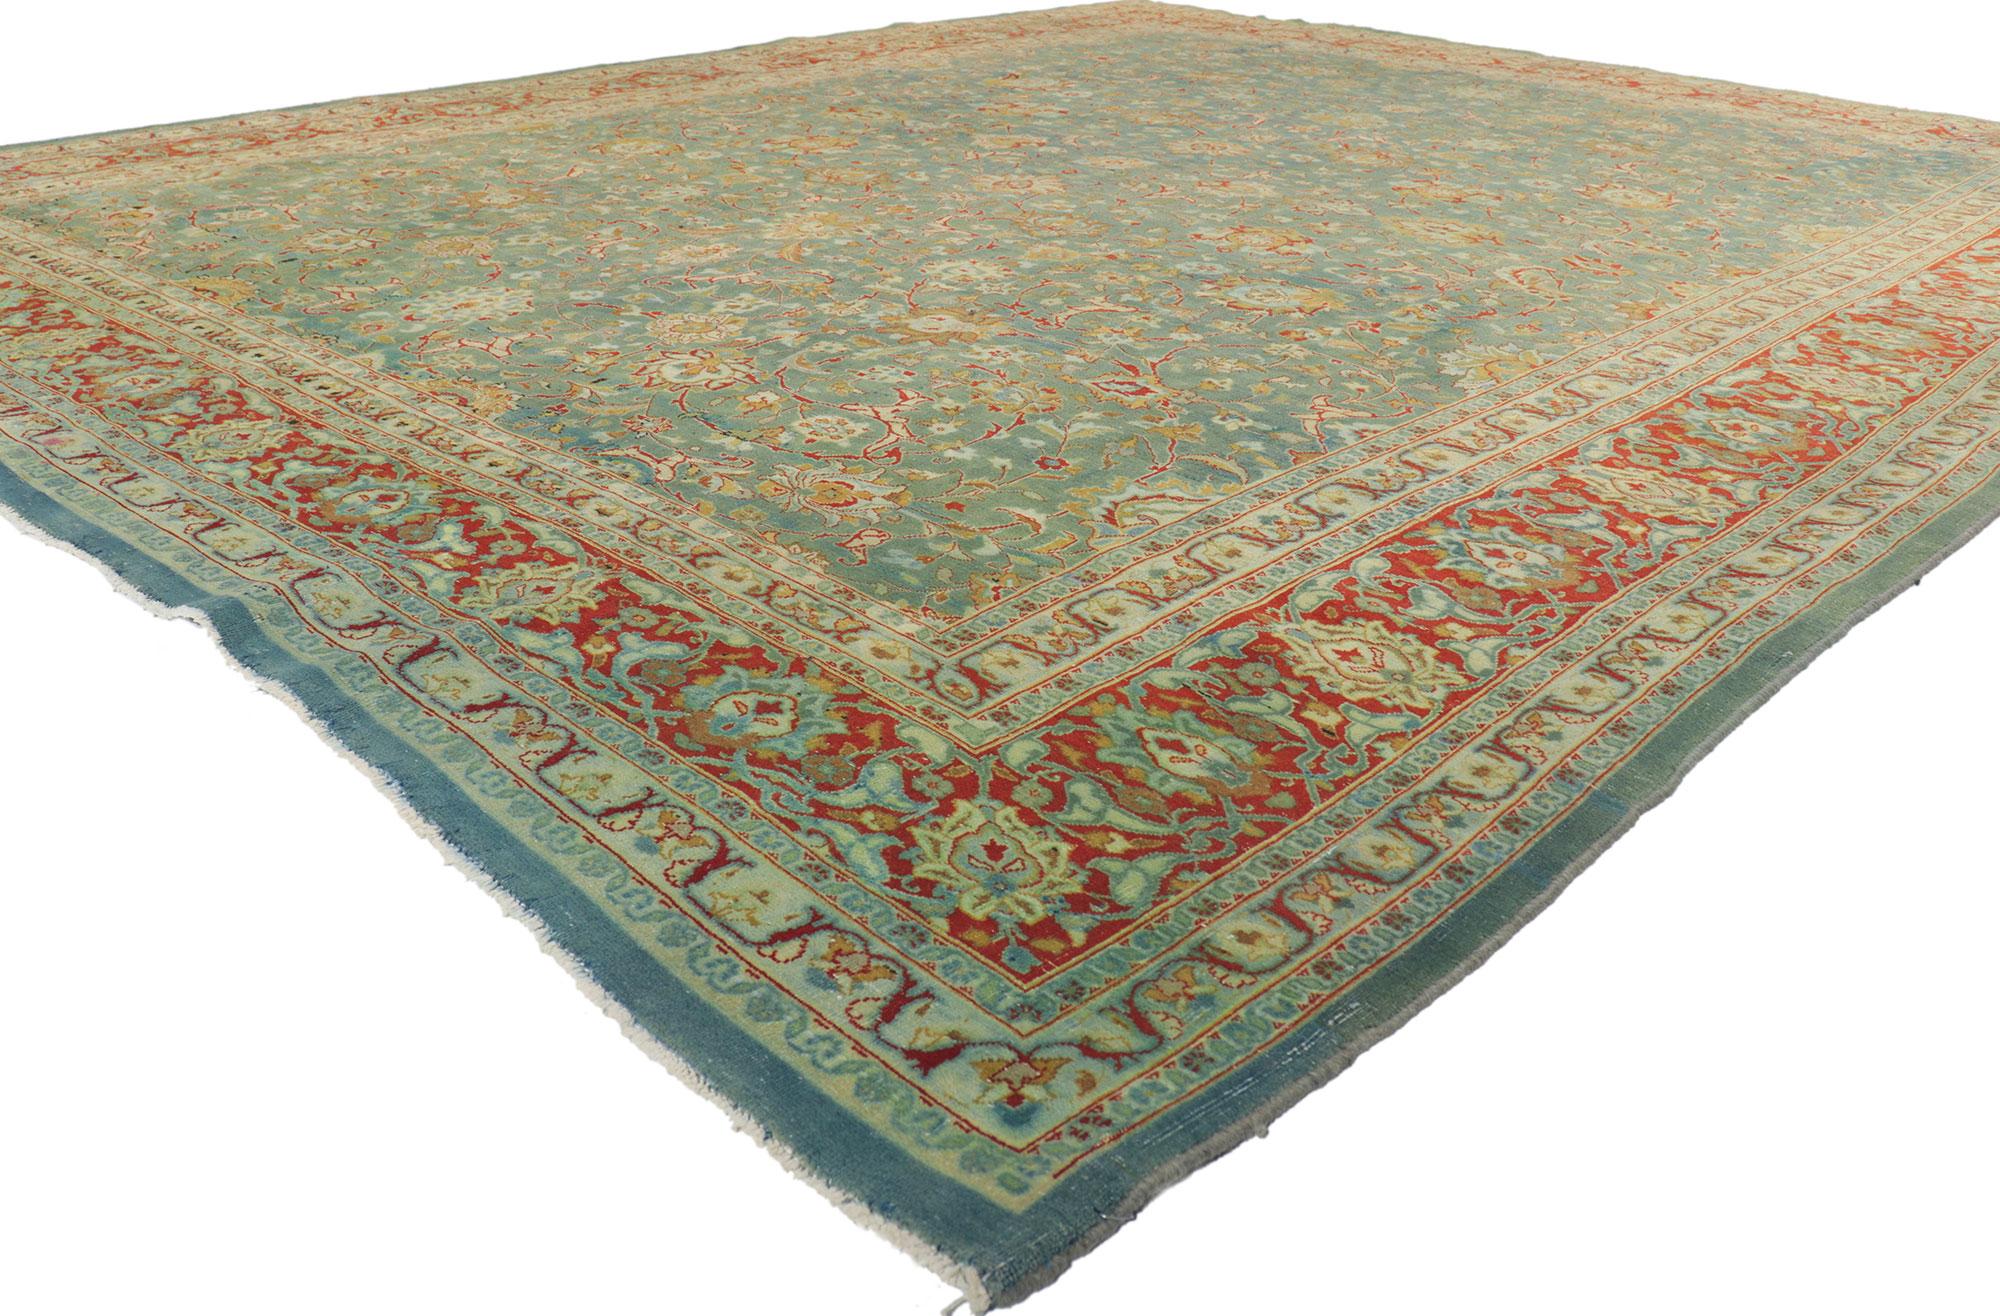 61178 Antique Persian Tabriz rug, 09'08 x 12'05. With its effortless beauty and timeless design, this hand knotted wool antique Persian Tabriz rug is poised to impress. The antique washed field features an allover botanical pattern composed of